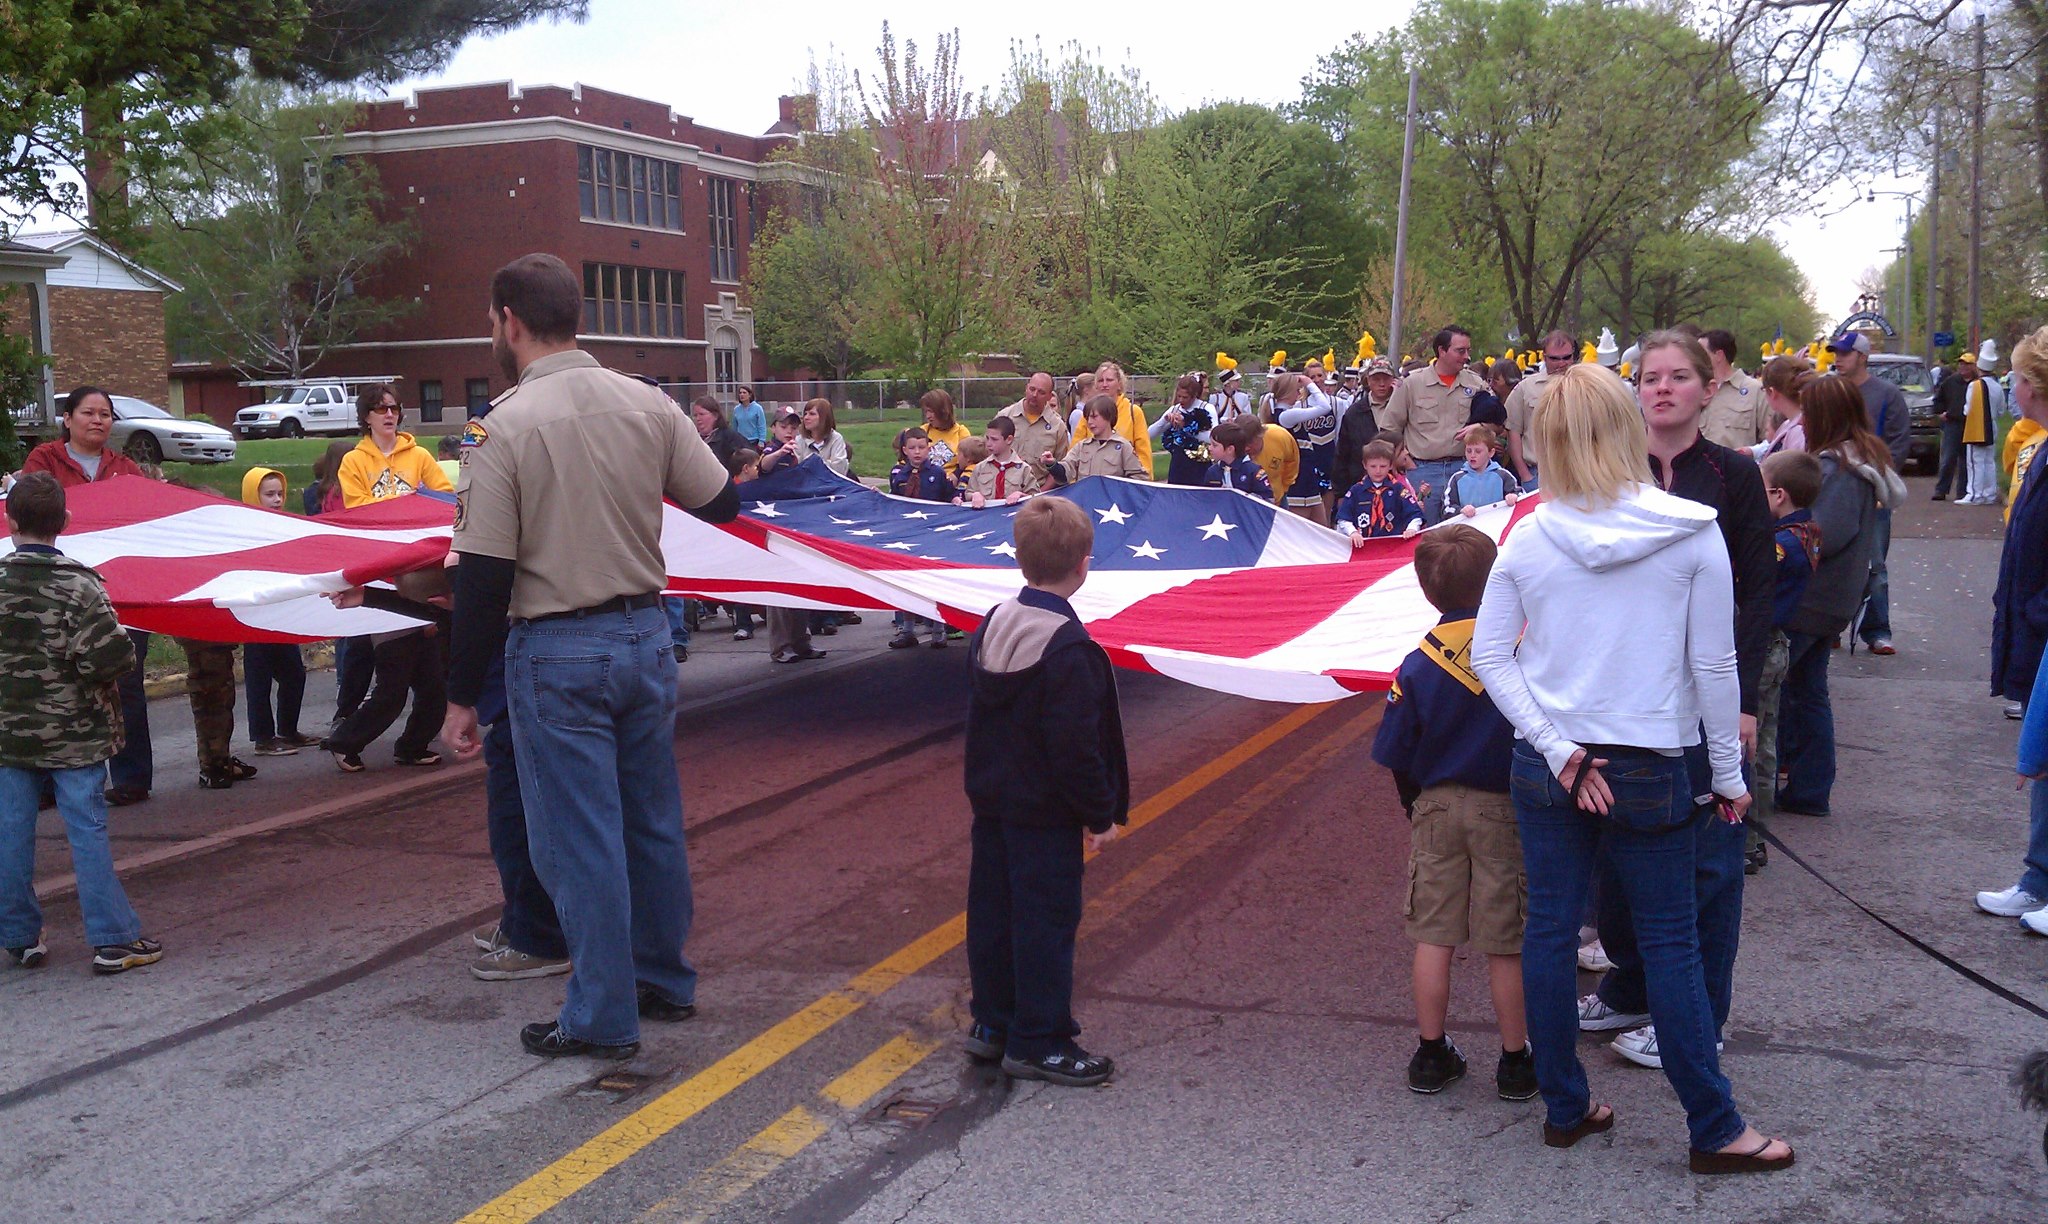 Large flag being held along a parade route